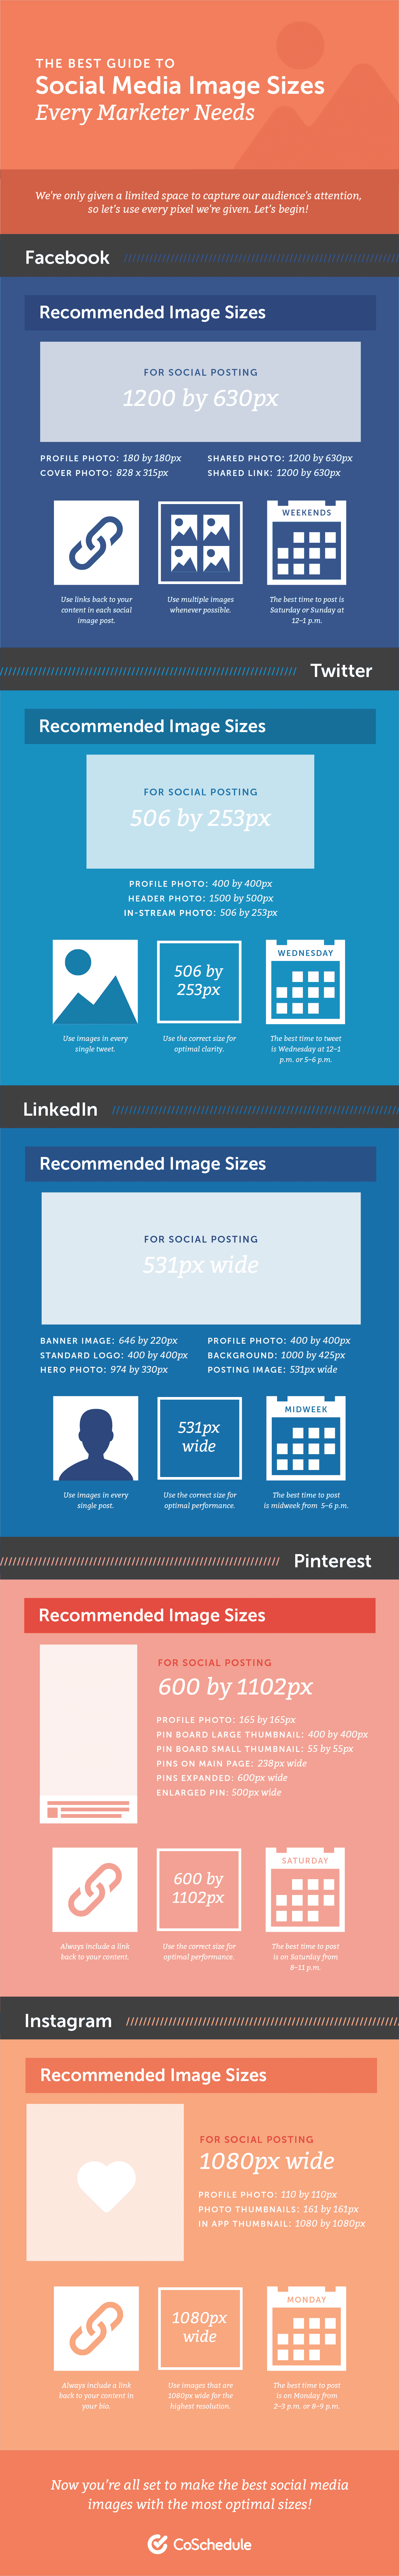 Guide to social media image sizing.